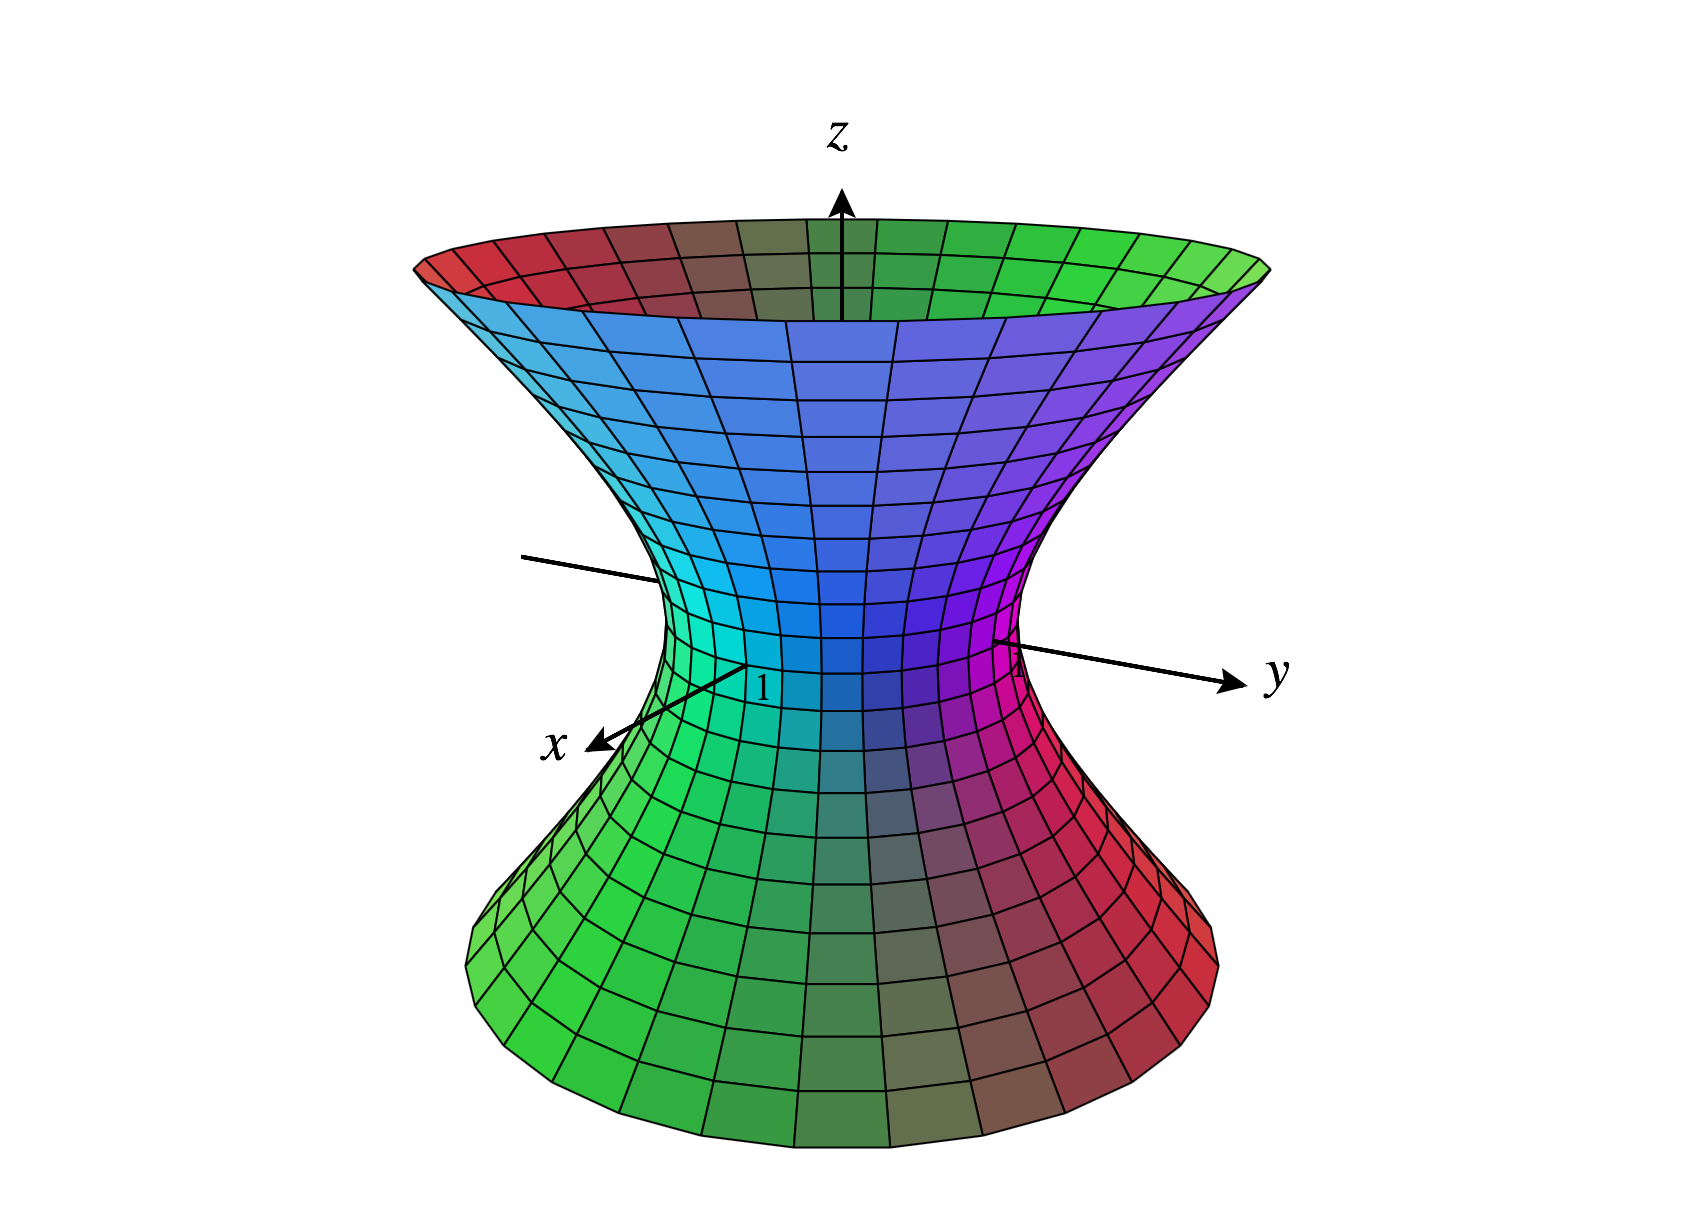 dirac delta for spherical coords